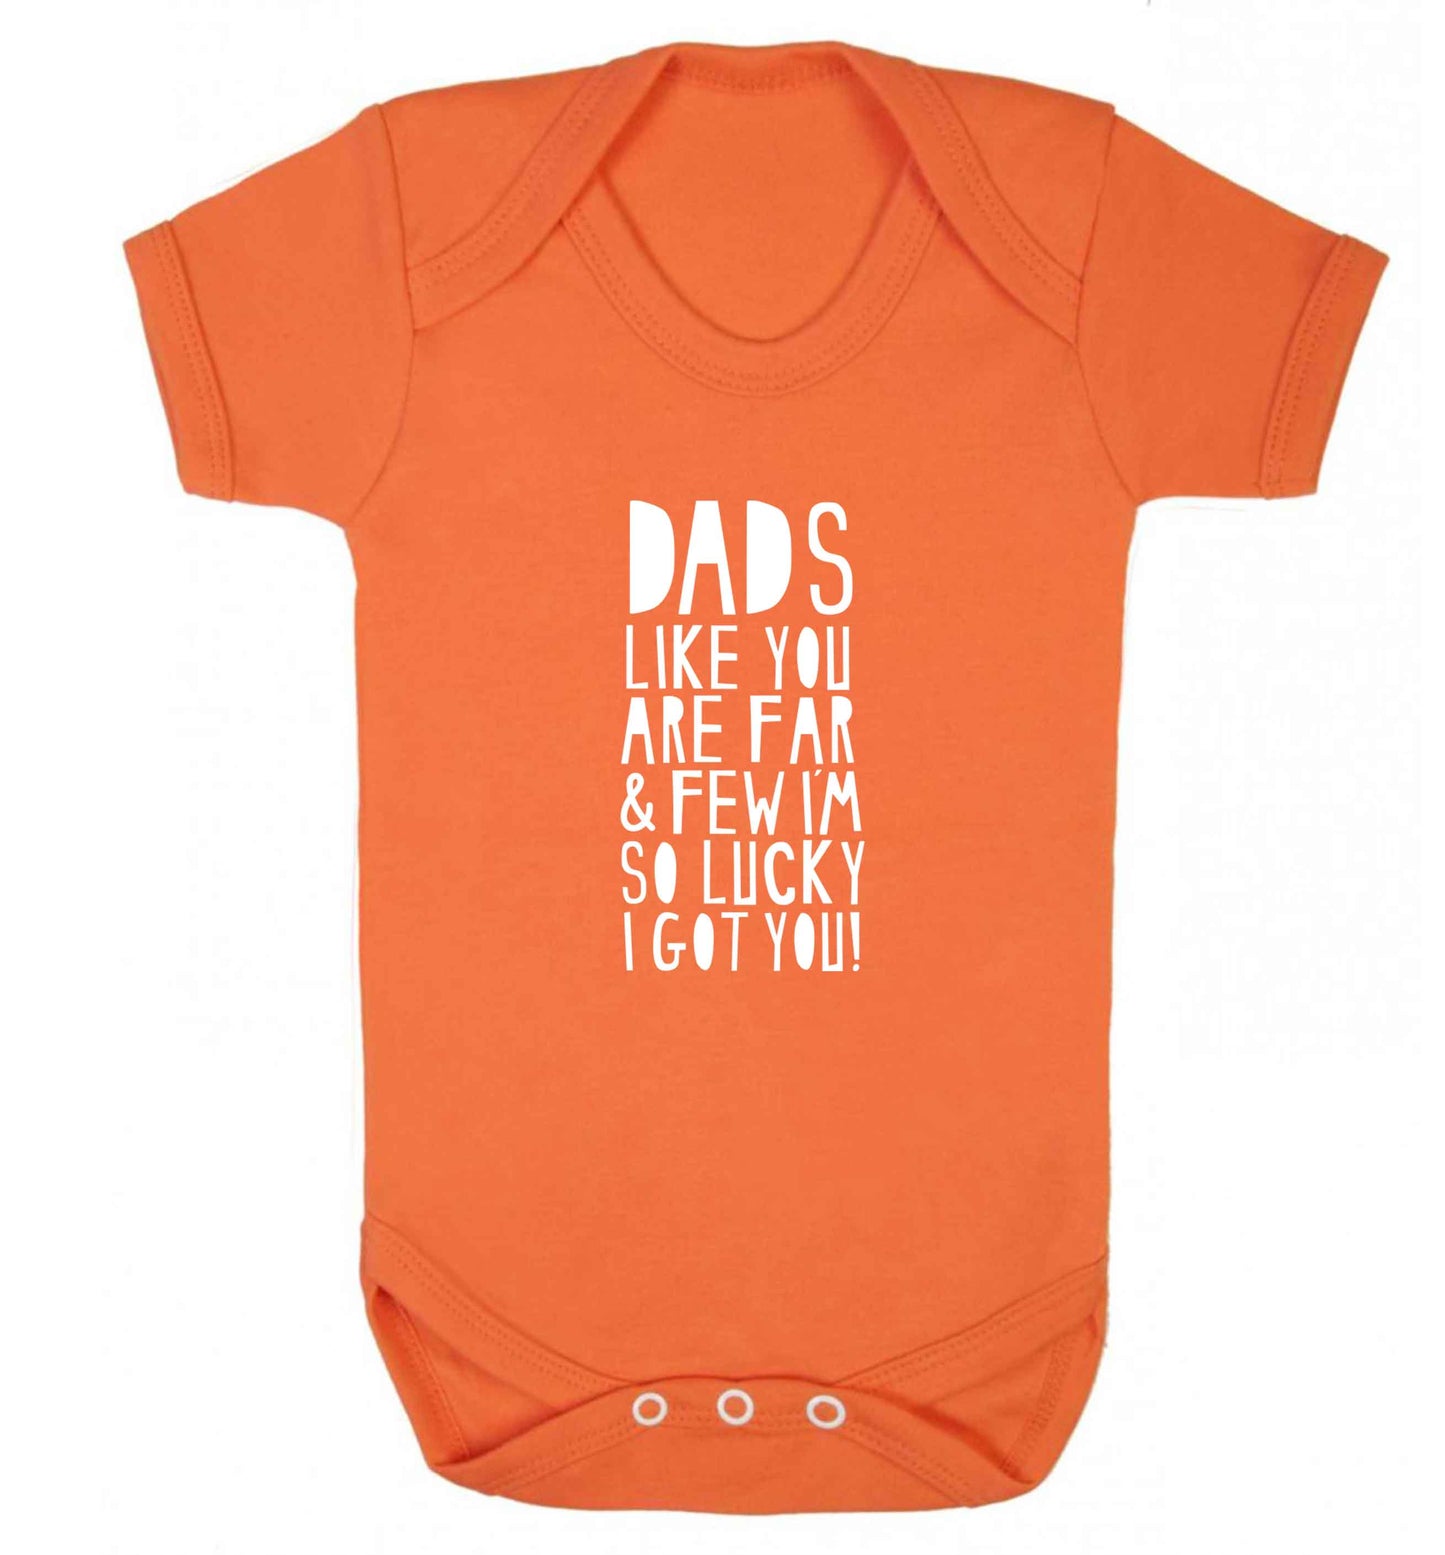 Dads like you are far and few I'm so luck I got you! baby vest orange 18-24 months